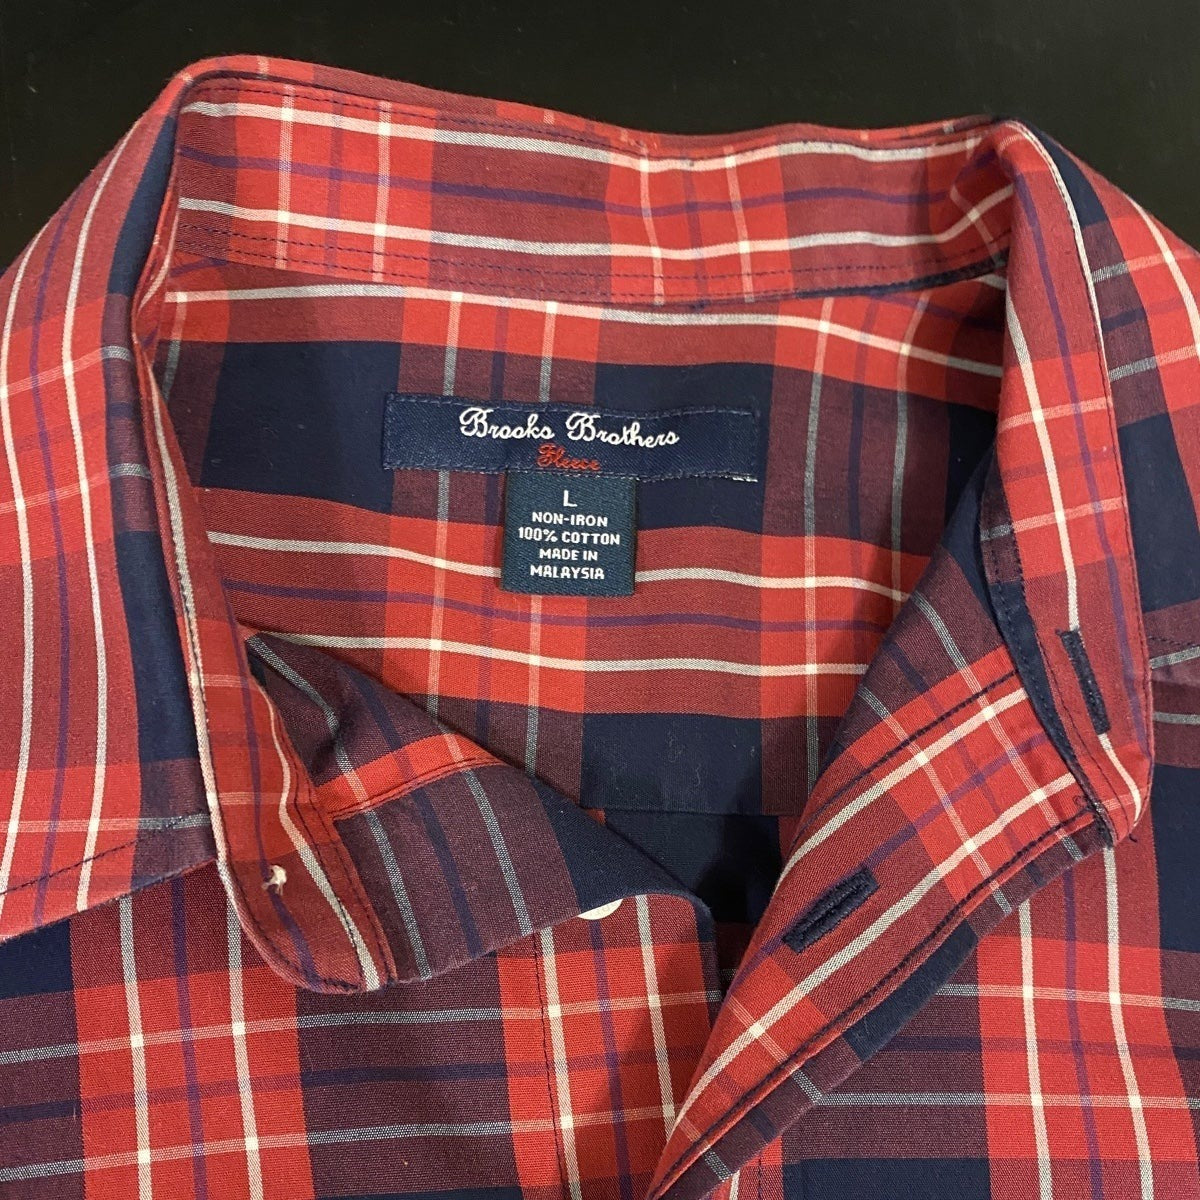 Large Brooks Brothers button down shirt